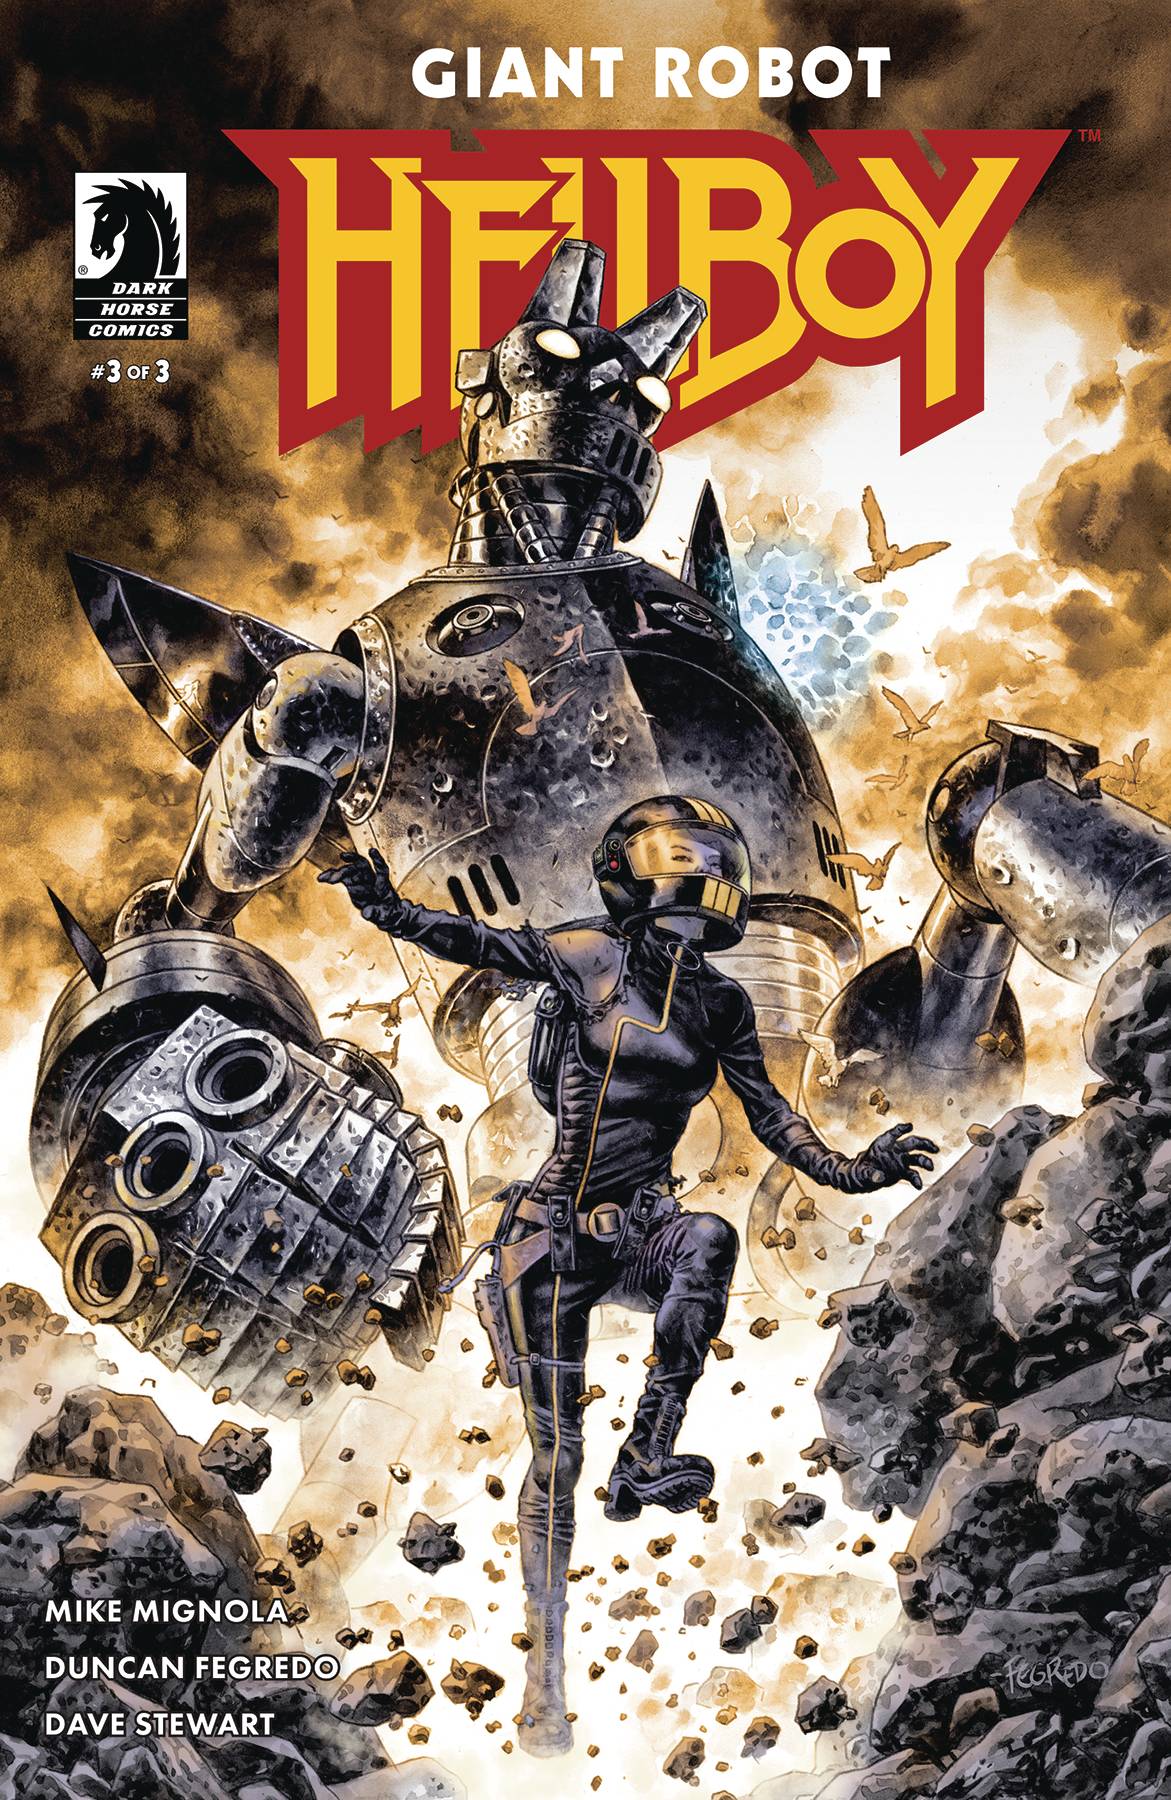 INTERVIEW: Inside GIANT ROBOT HELLBOY with Duncan Fegredo